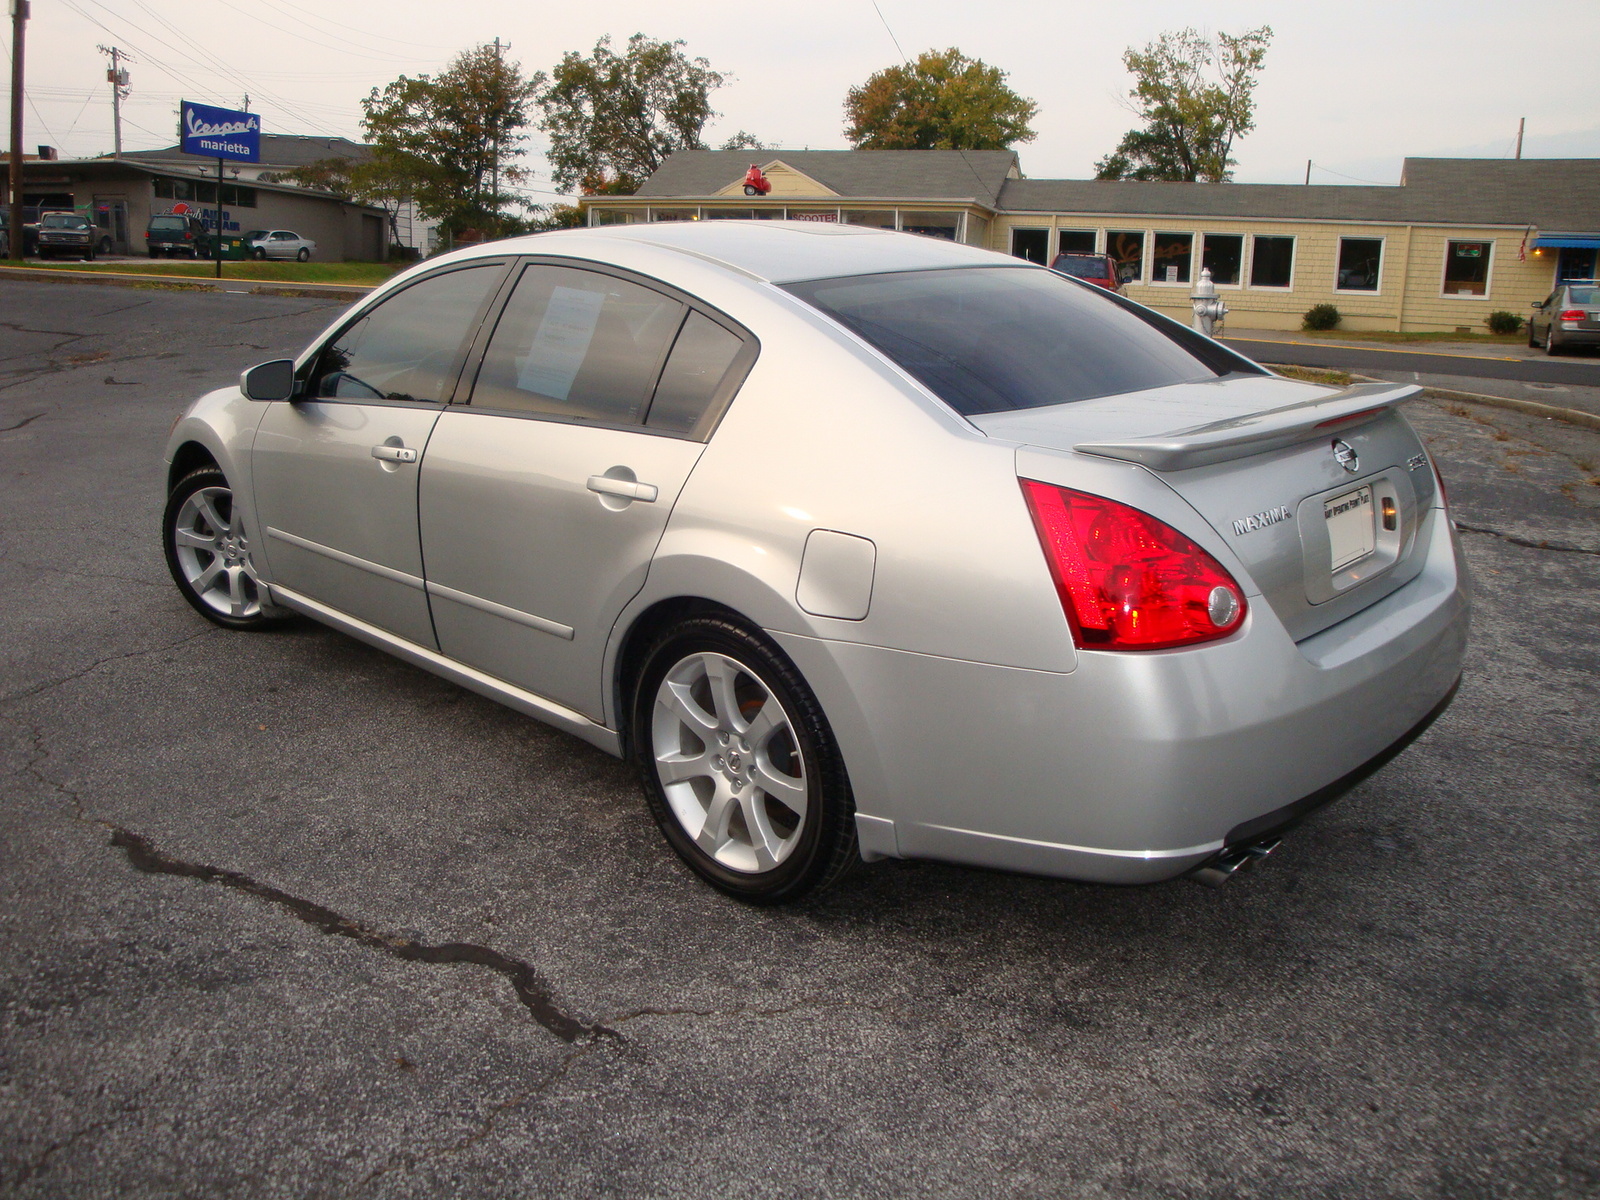 Used 2008 nissan maxima sl review